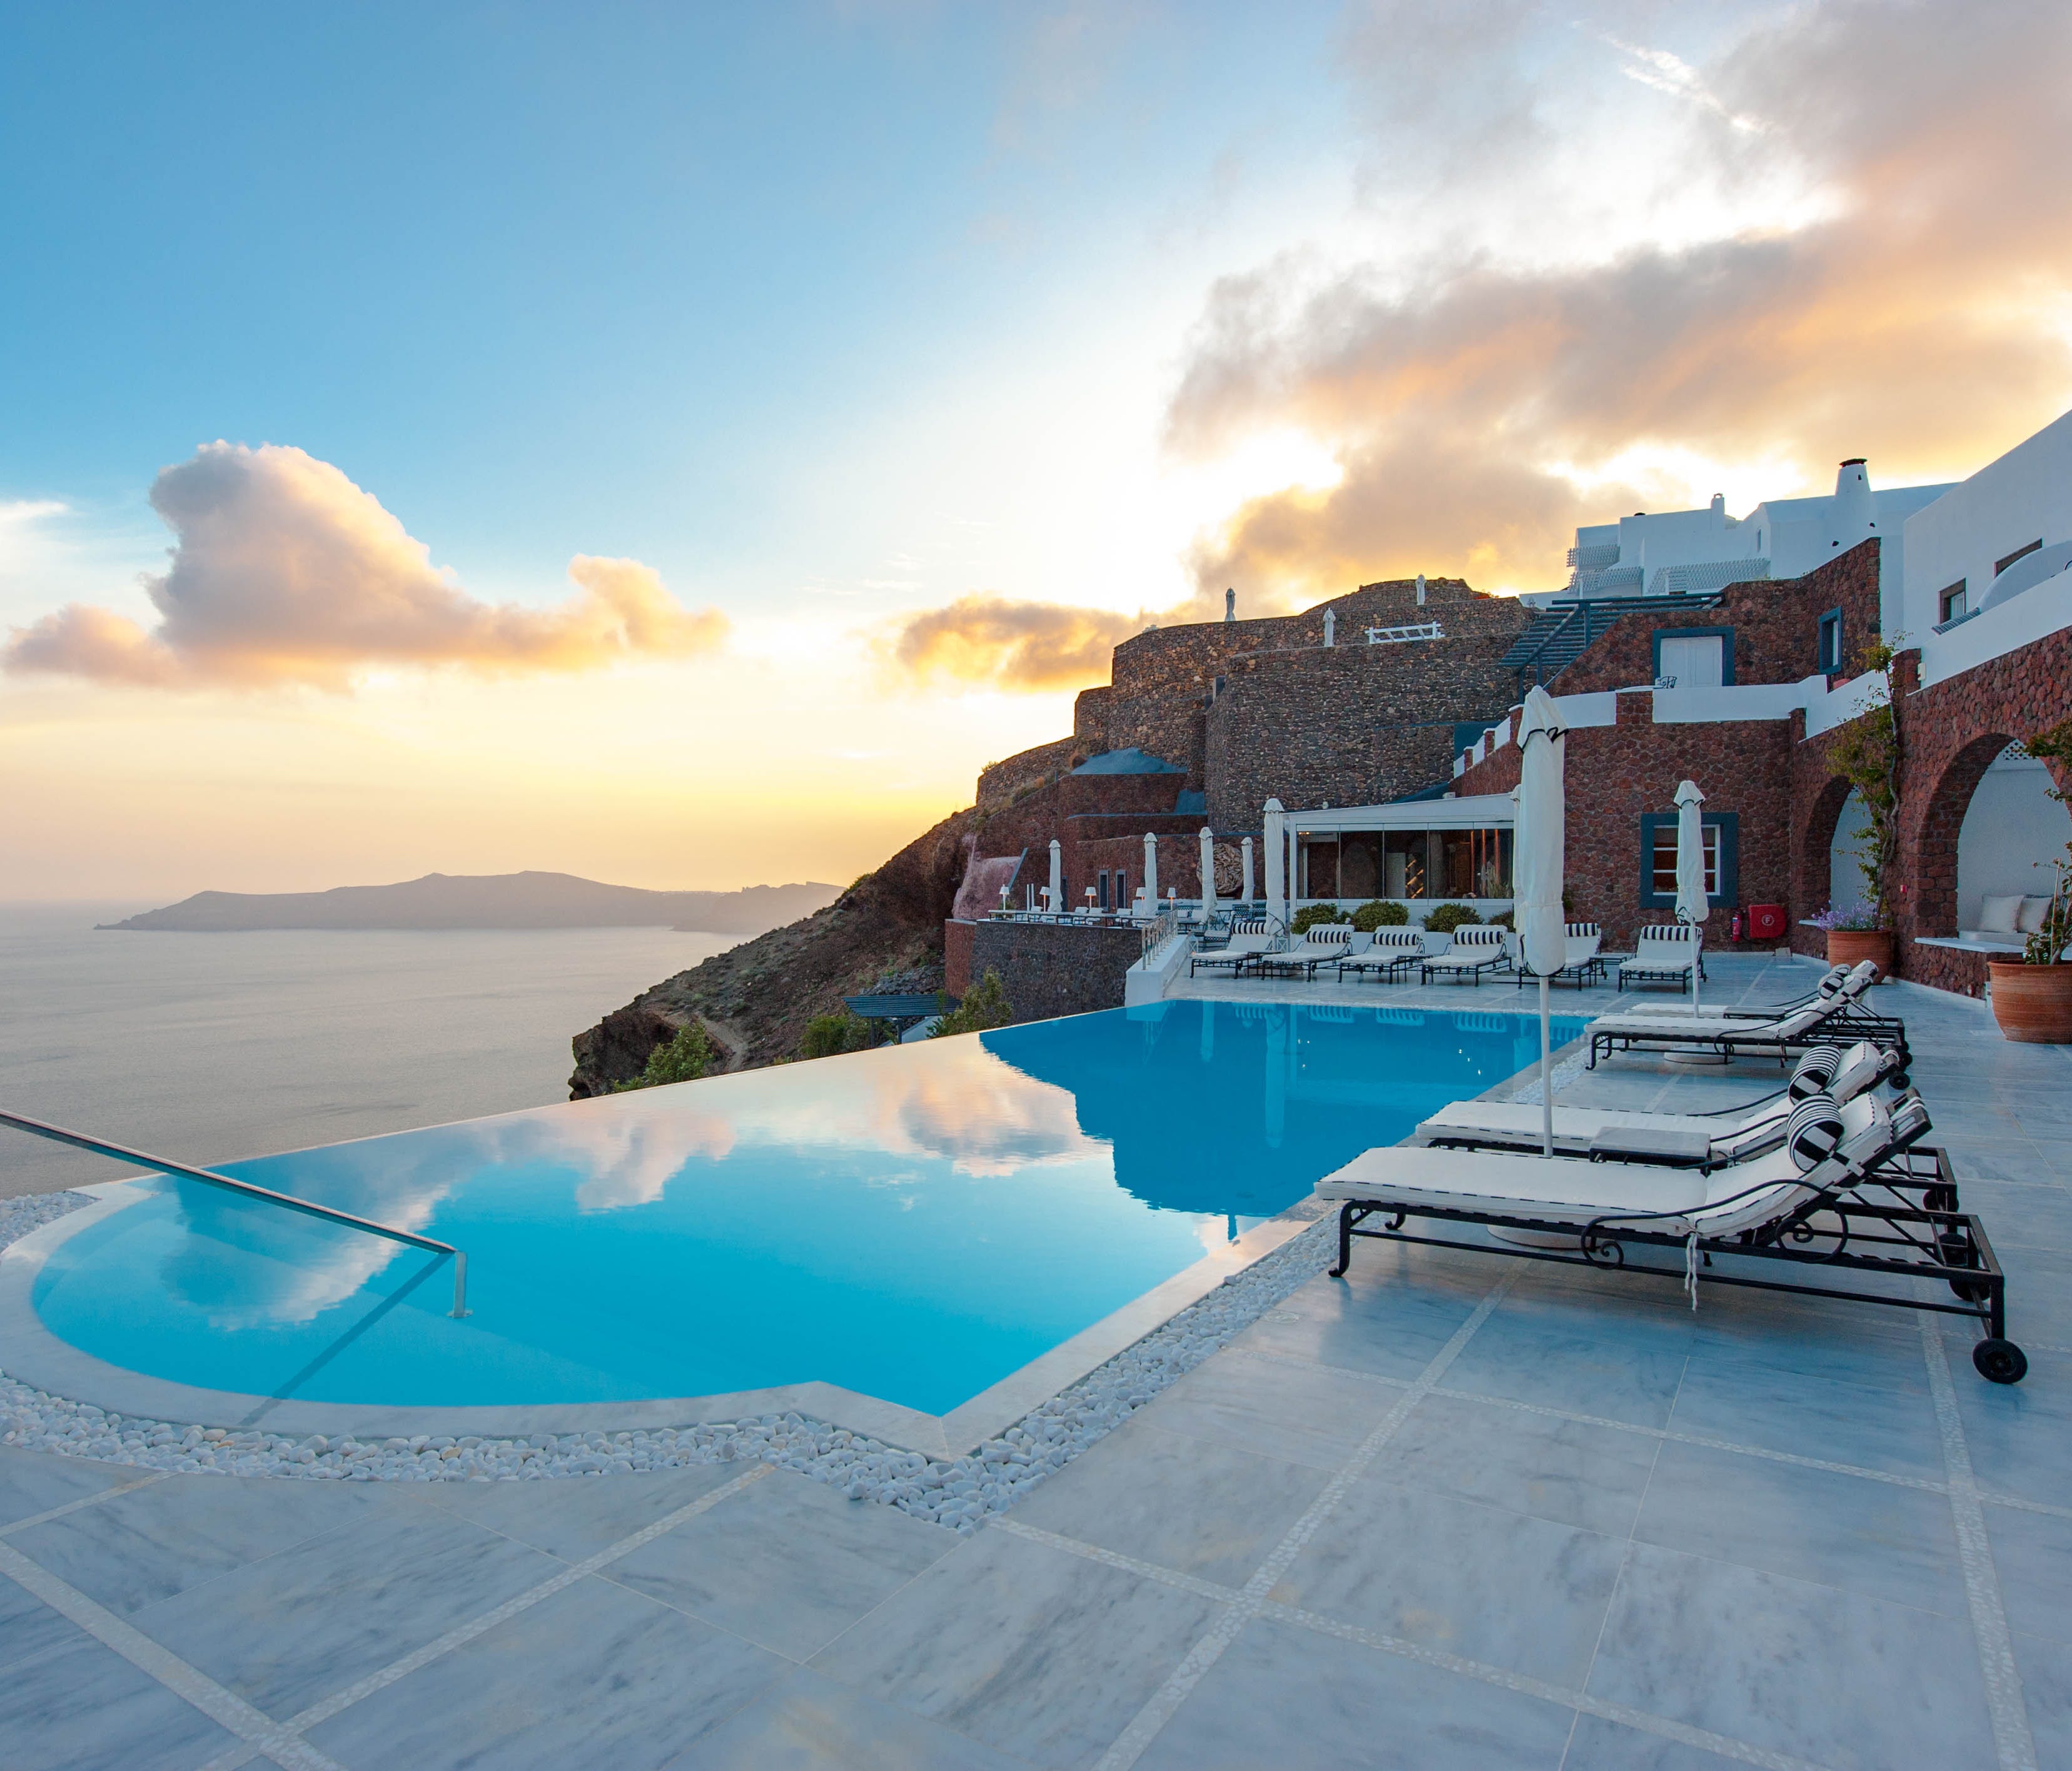 San Antonio Hotel, Santorini: Santorini is not in short supply of Instagram-able properties — and San Antonio Hotel, located in a secluded spot at the narrowest point on the island, is one prime example. Built into a natural cave formation within the